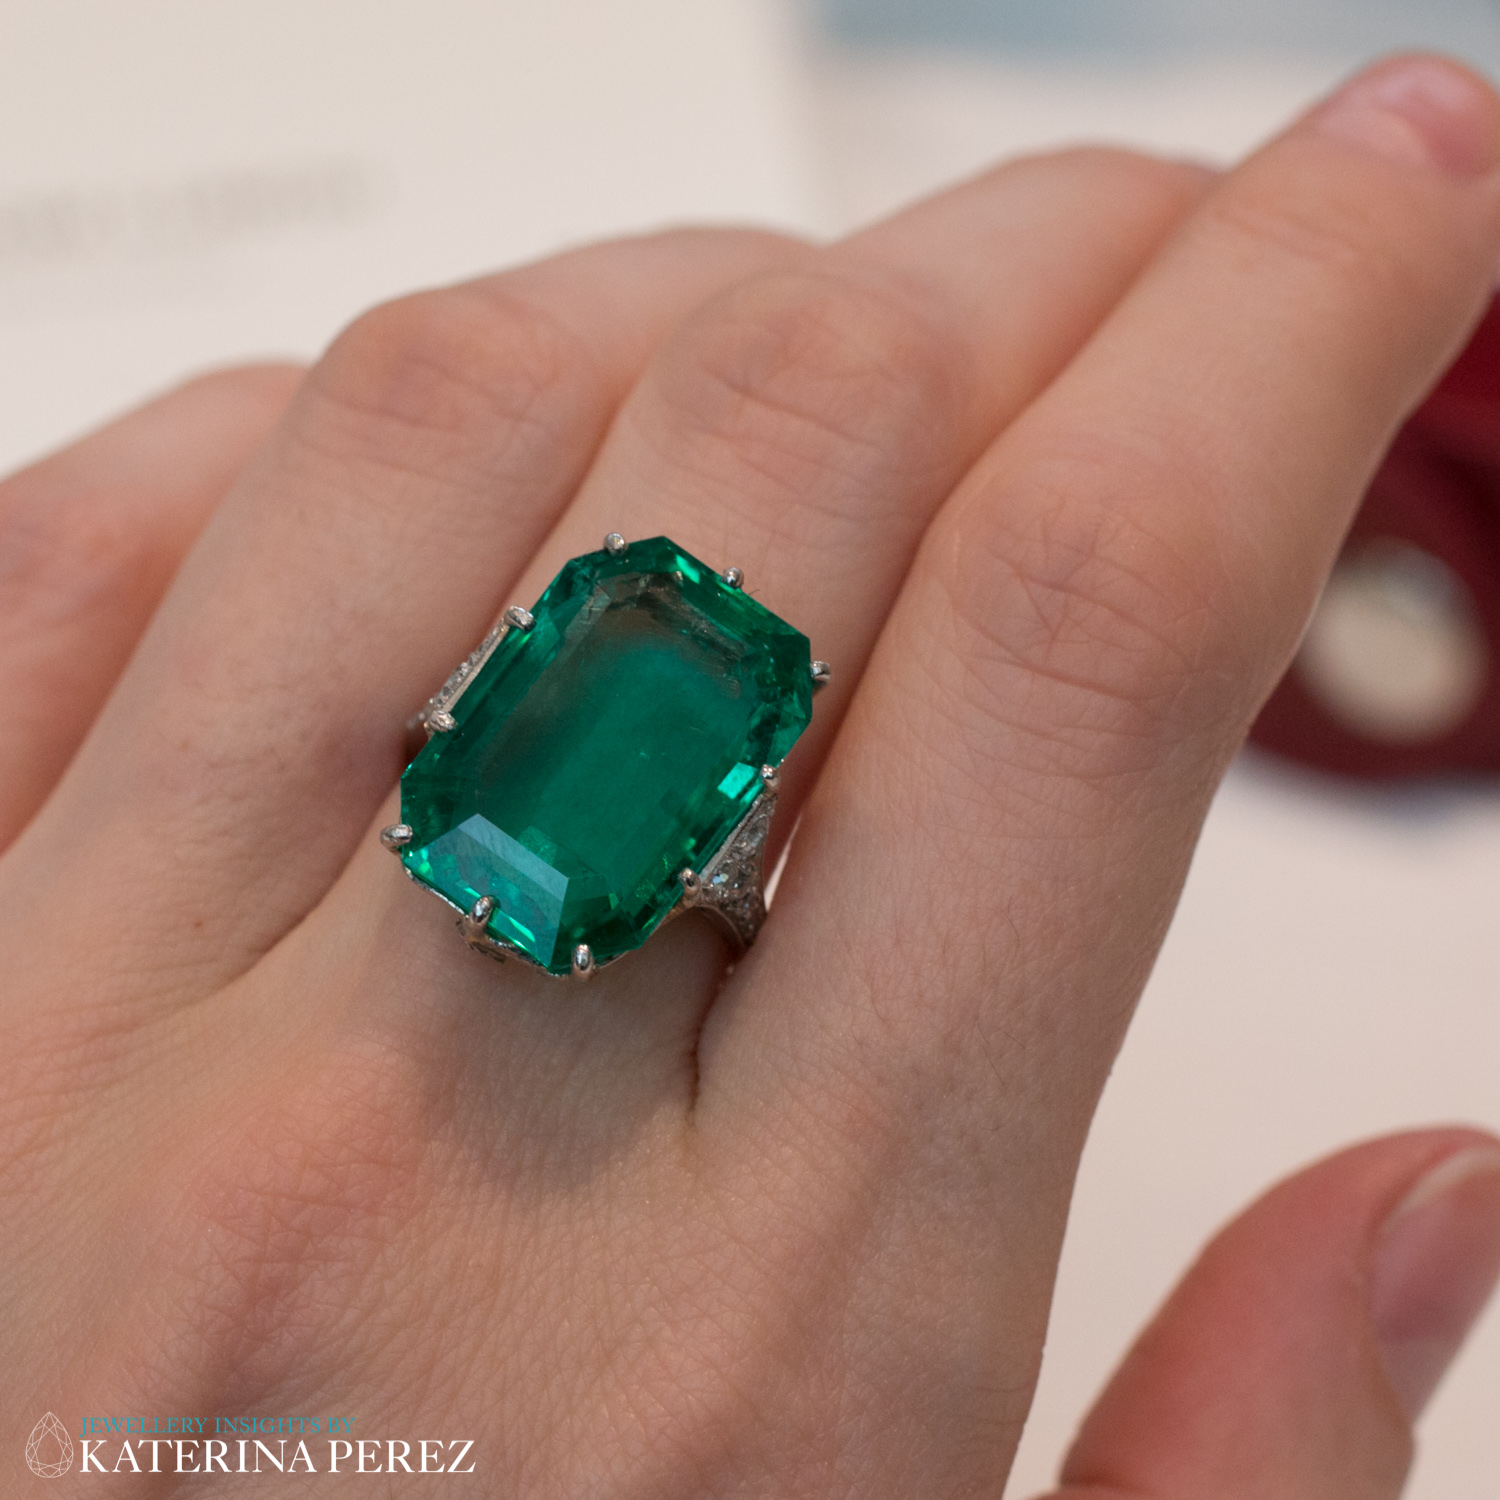 Art Deco Single Stone Emerald Ring, Circa 1920. Featuring step-cut emerald, weighing 14.70 carats and decorated with rose cut diamonds